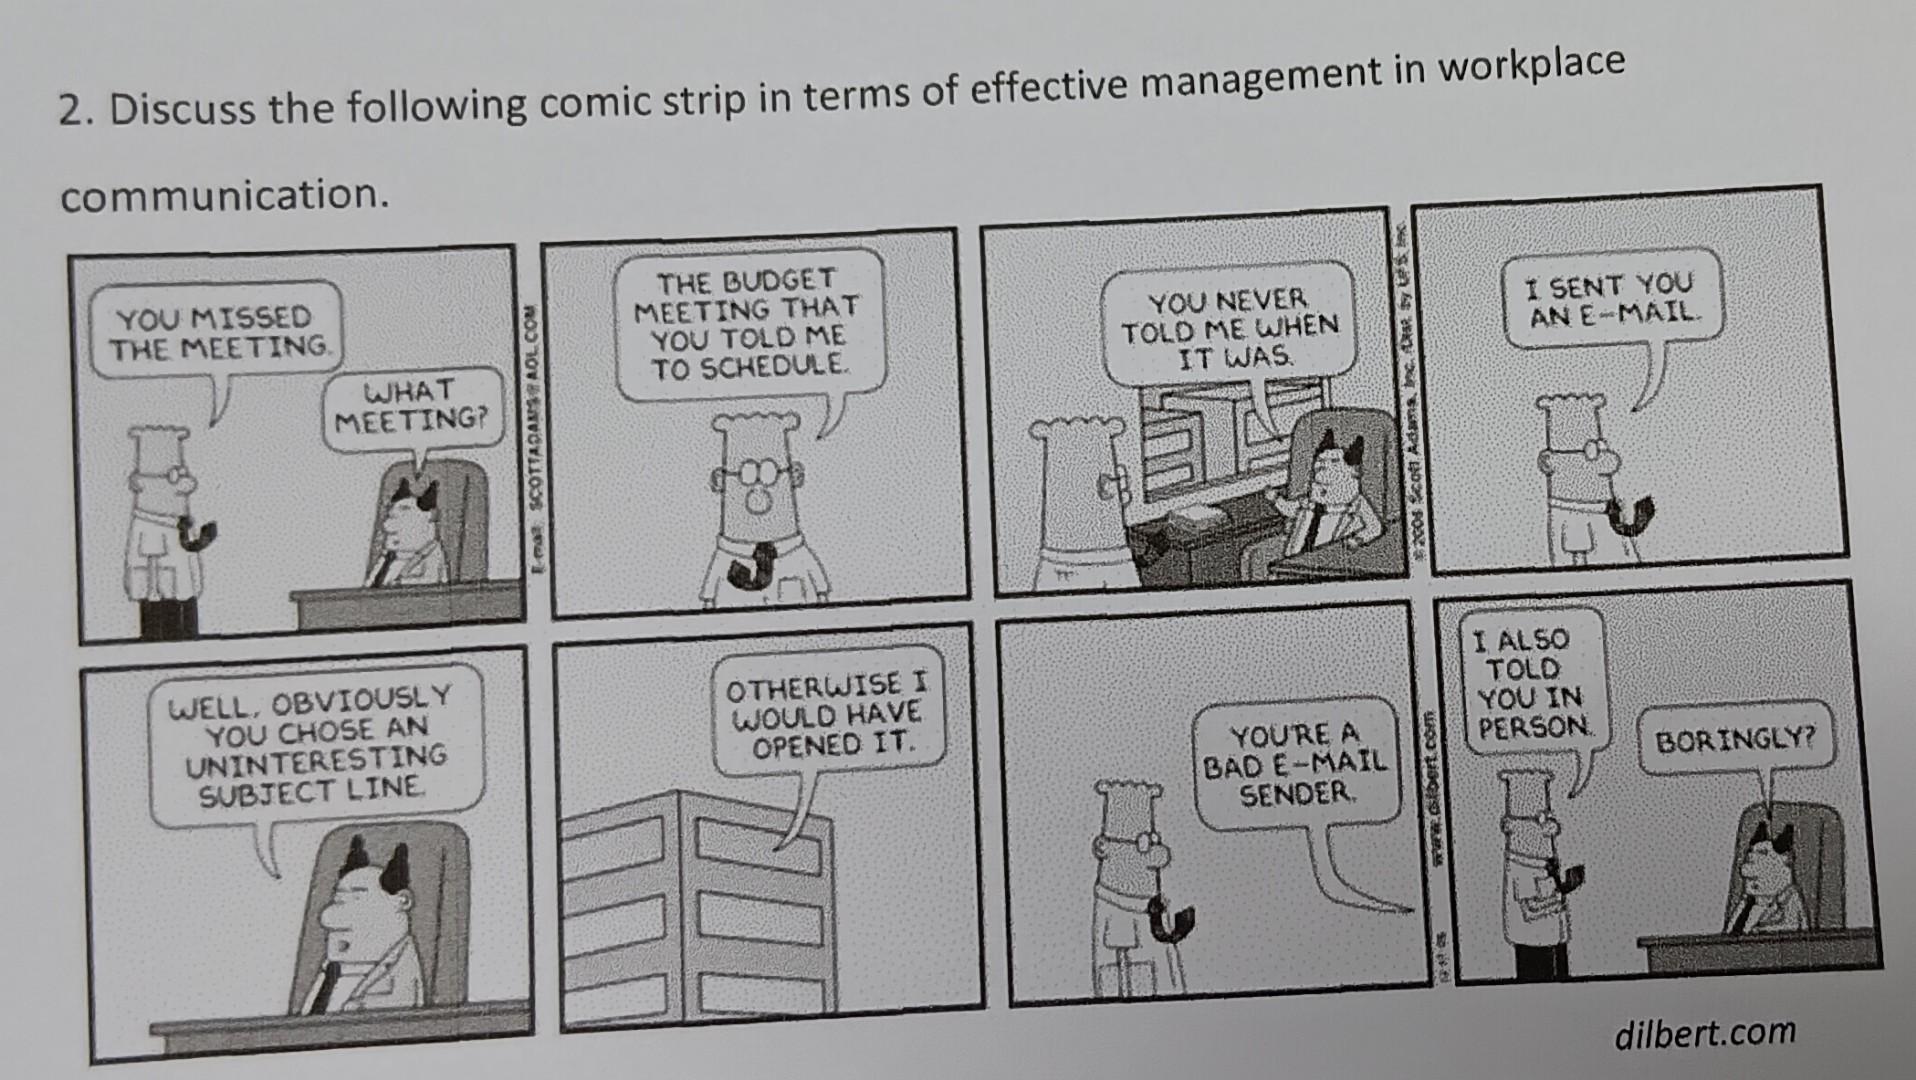 2. Discuss the following comic strip in terms of effective management in workplace communication. YOU MISSED